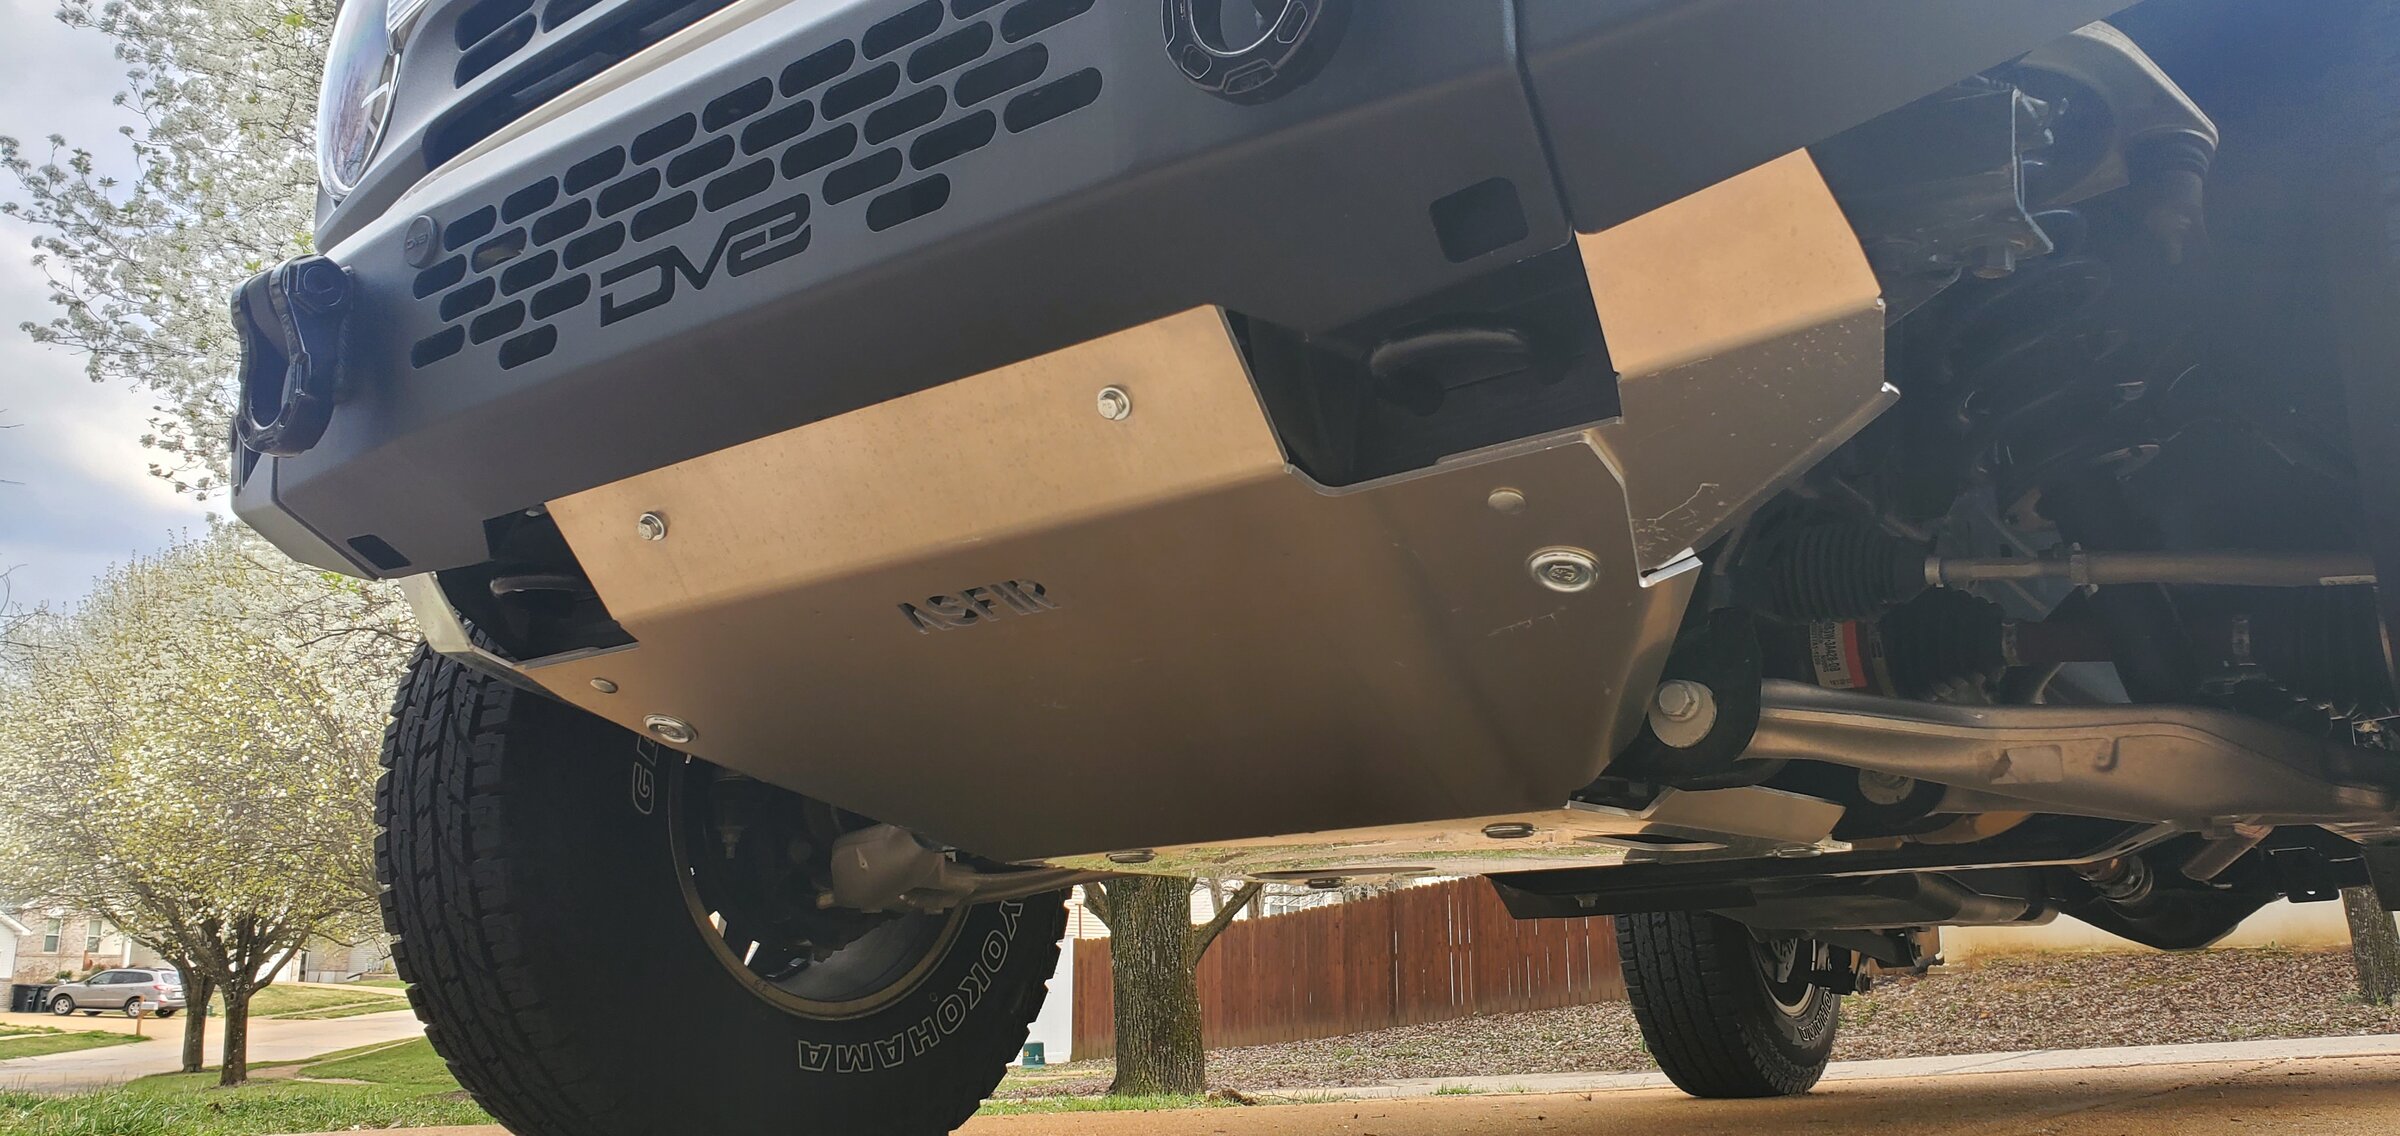 Ford Bronco Underbody aluminum skidplates and protection by ASFIR 4x4 20220329_173542